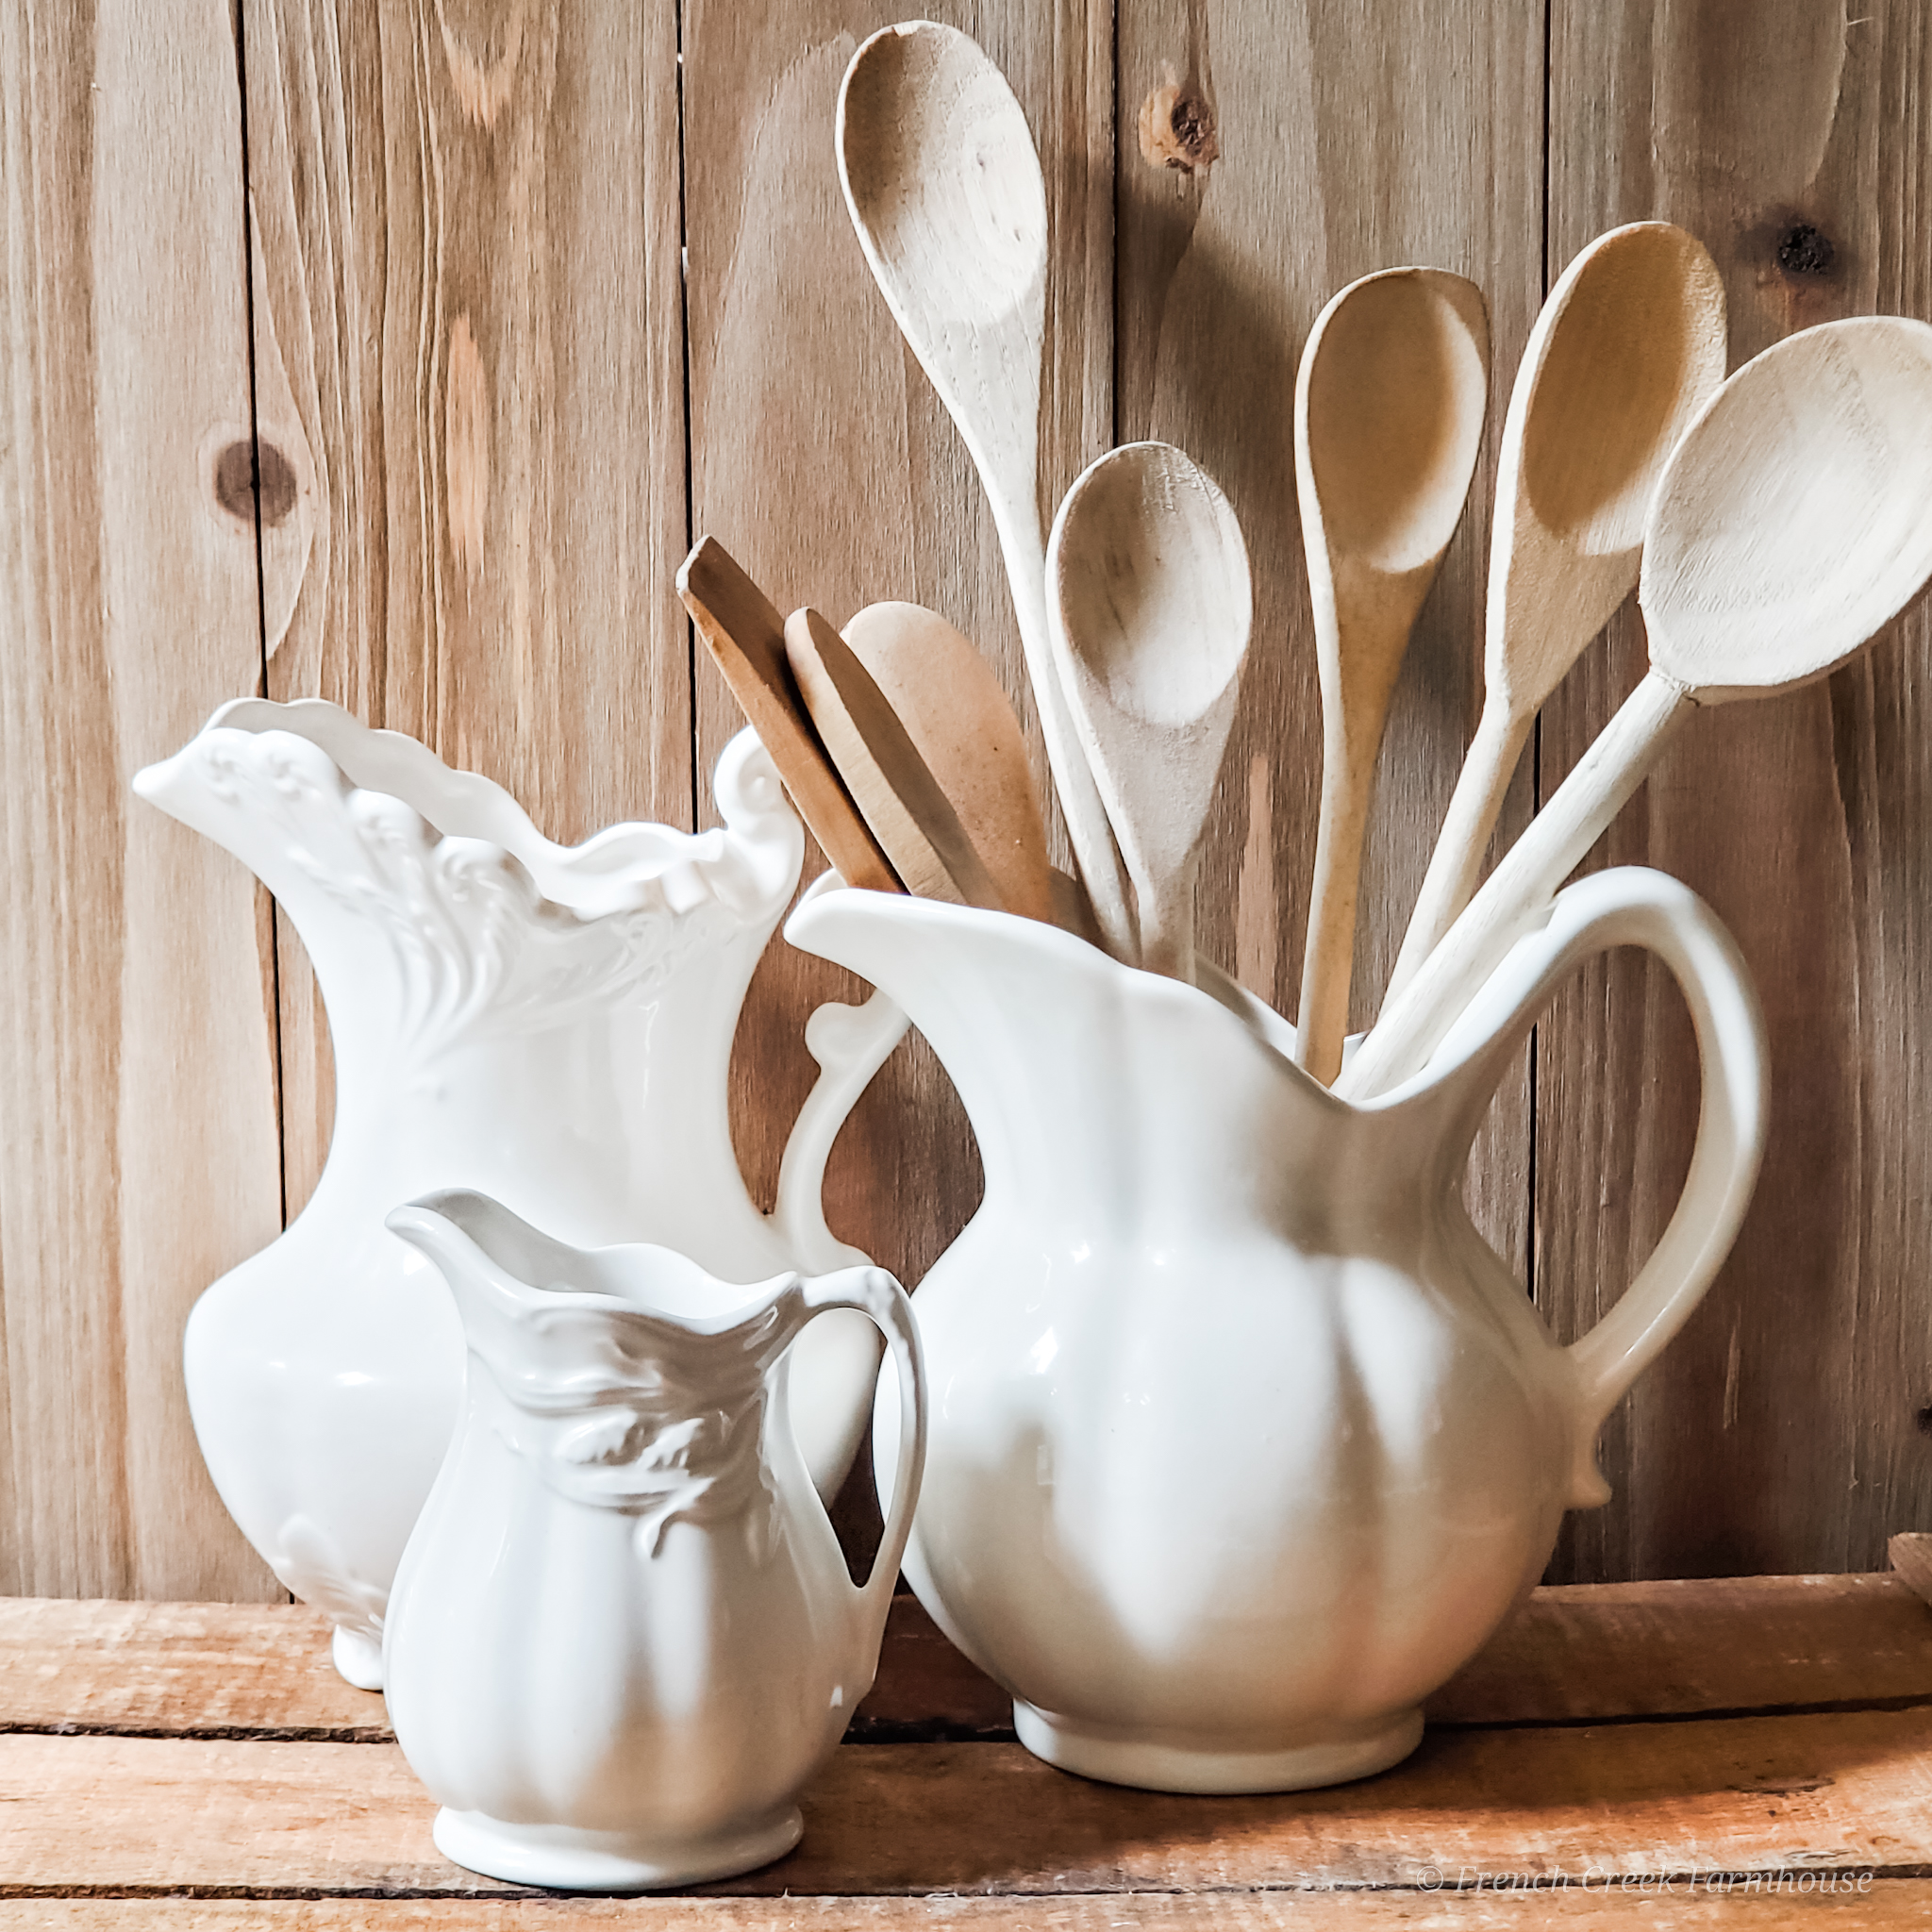 A collection of old wooden spoons in ironstone pitchers make great kitchen decor